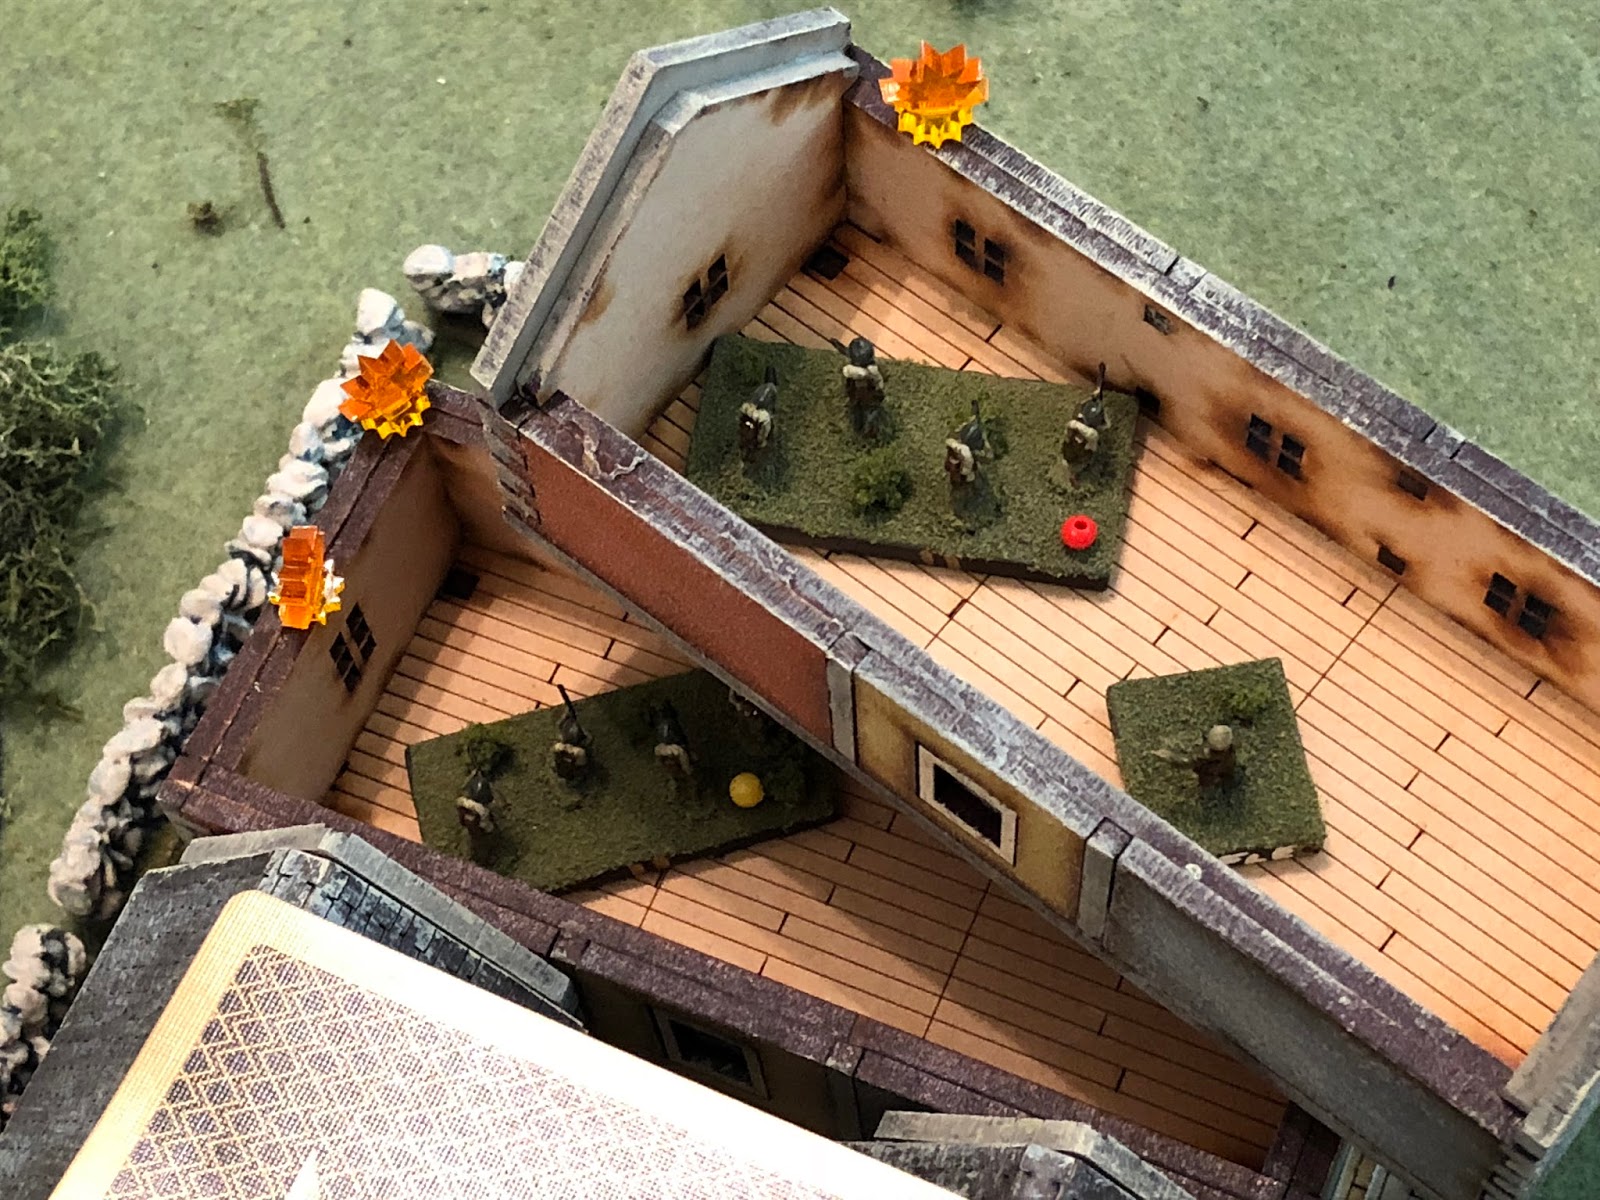  Pinning the enemy squad on the 2nd floor (yellow bead). 